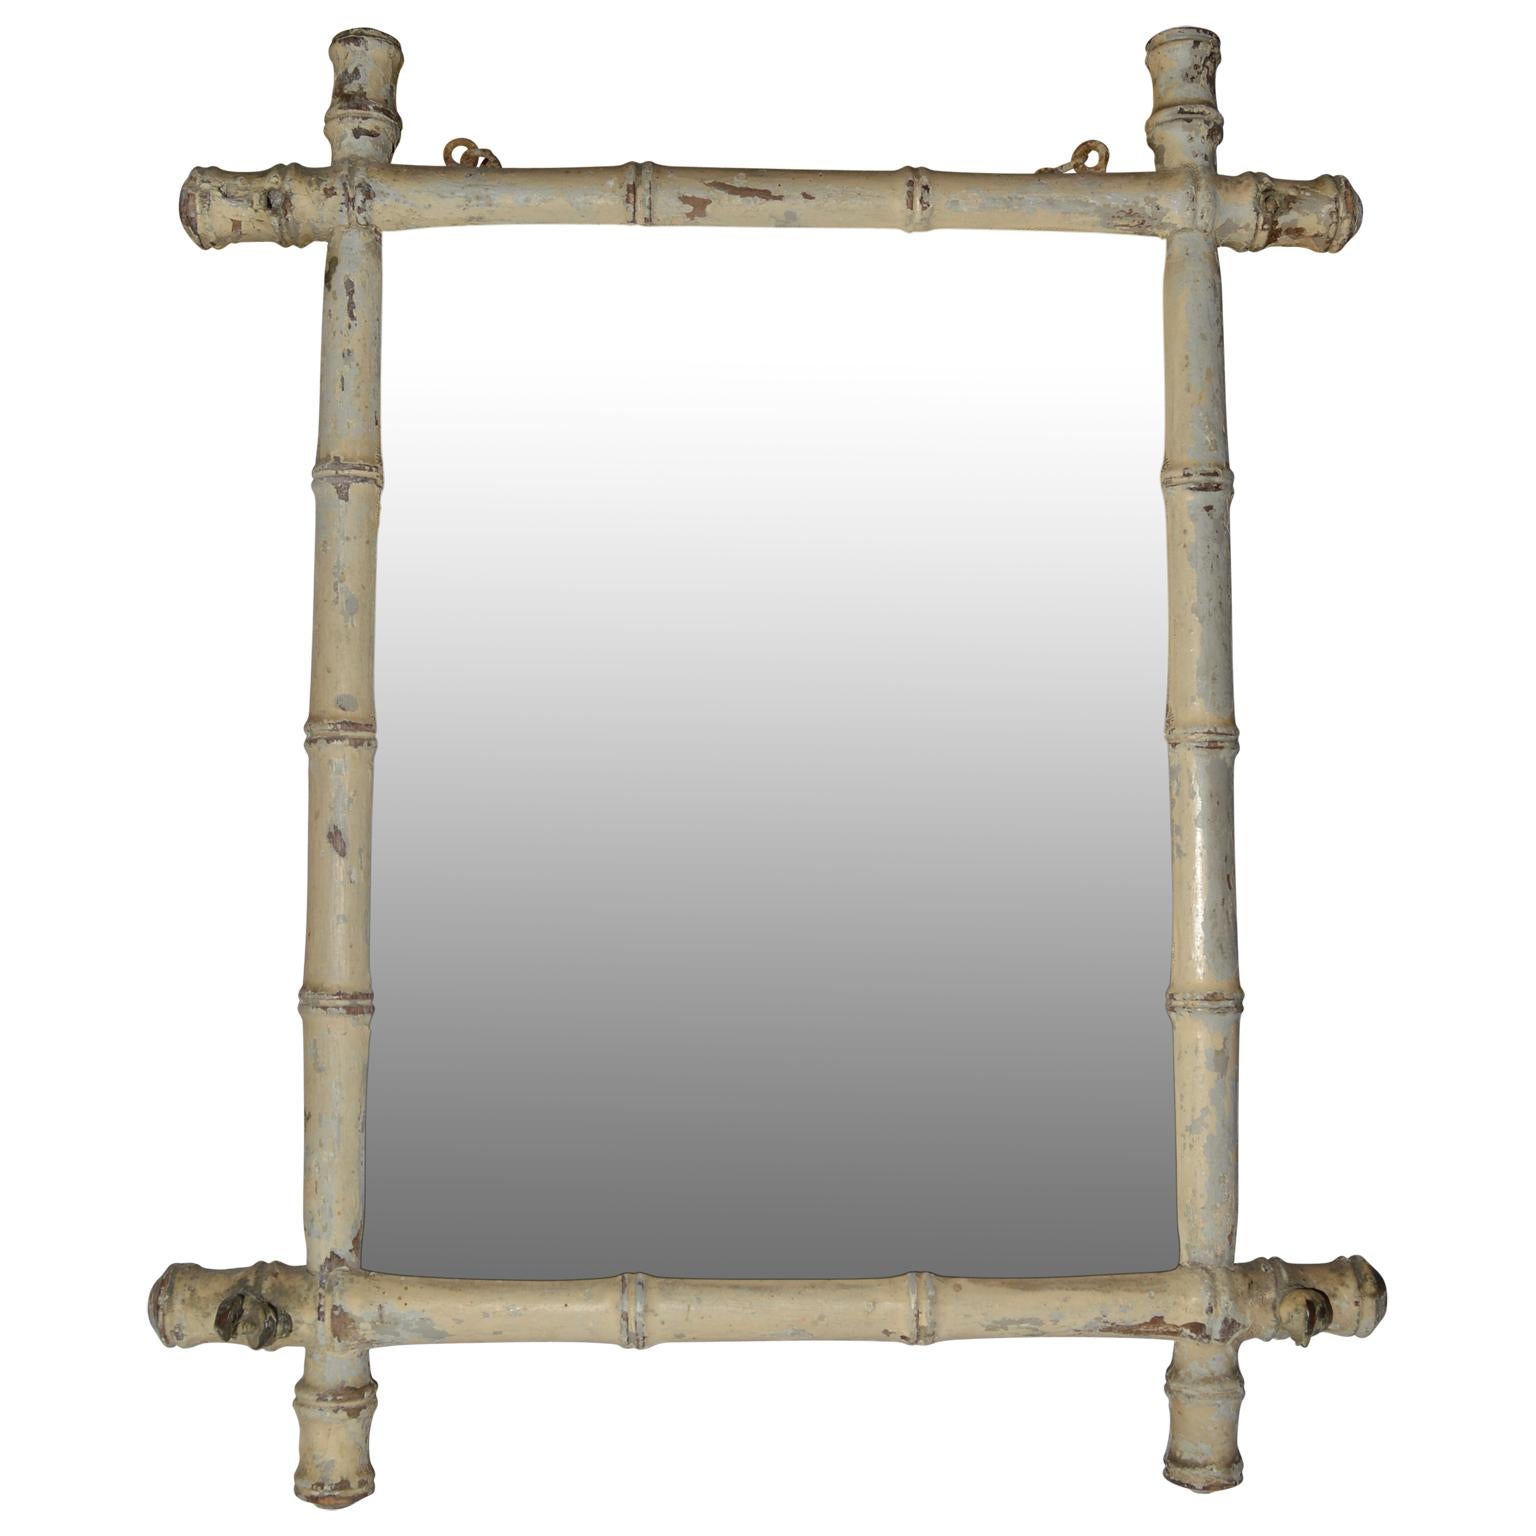 Small early 20th century white-painted French faux bamboo wall mirror.